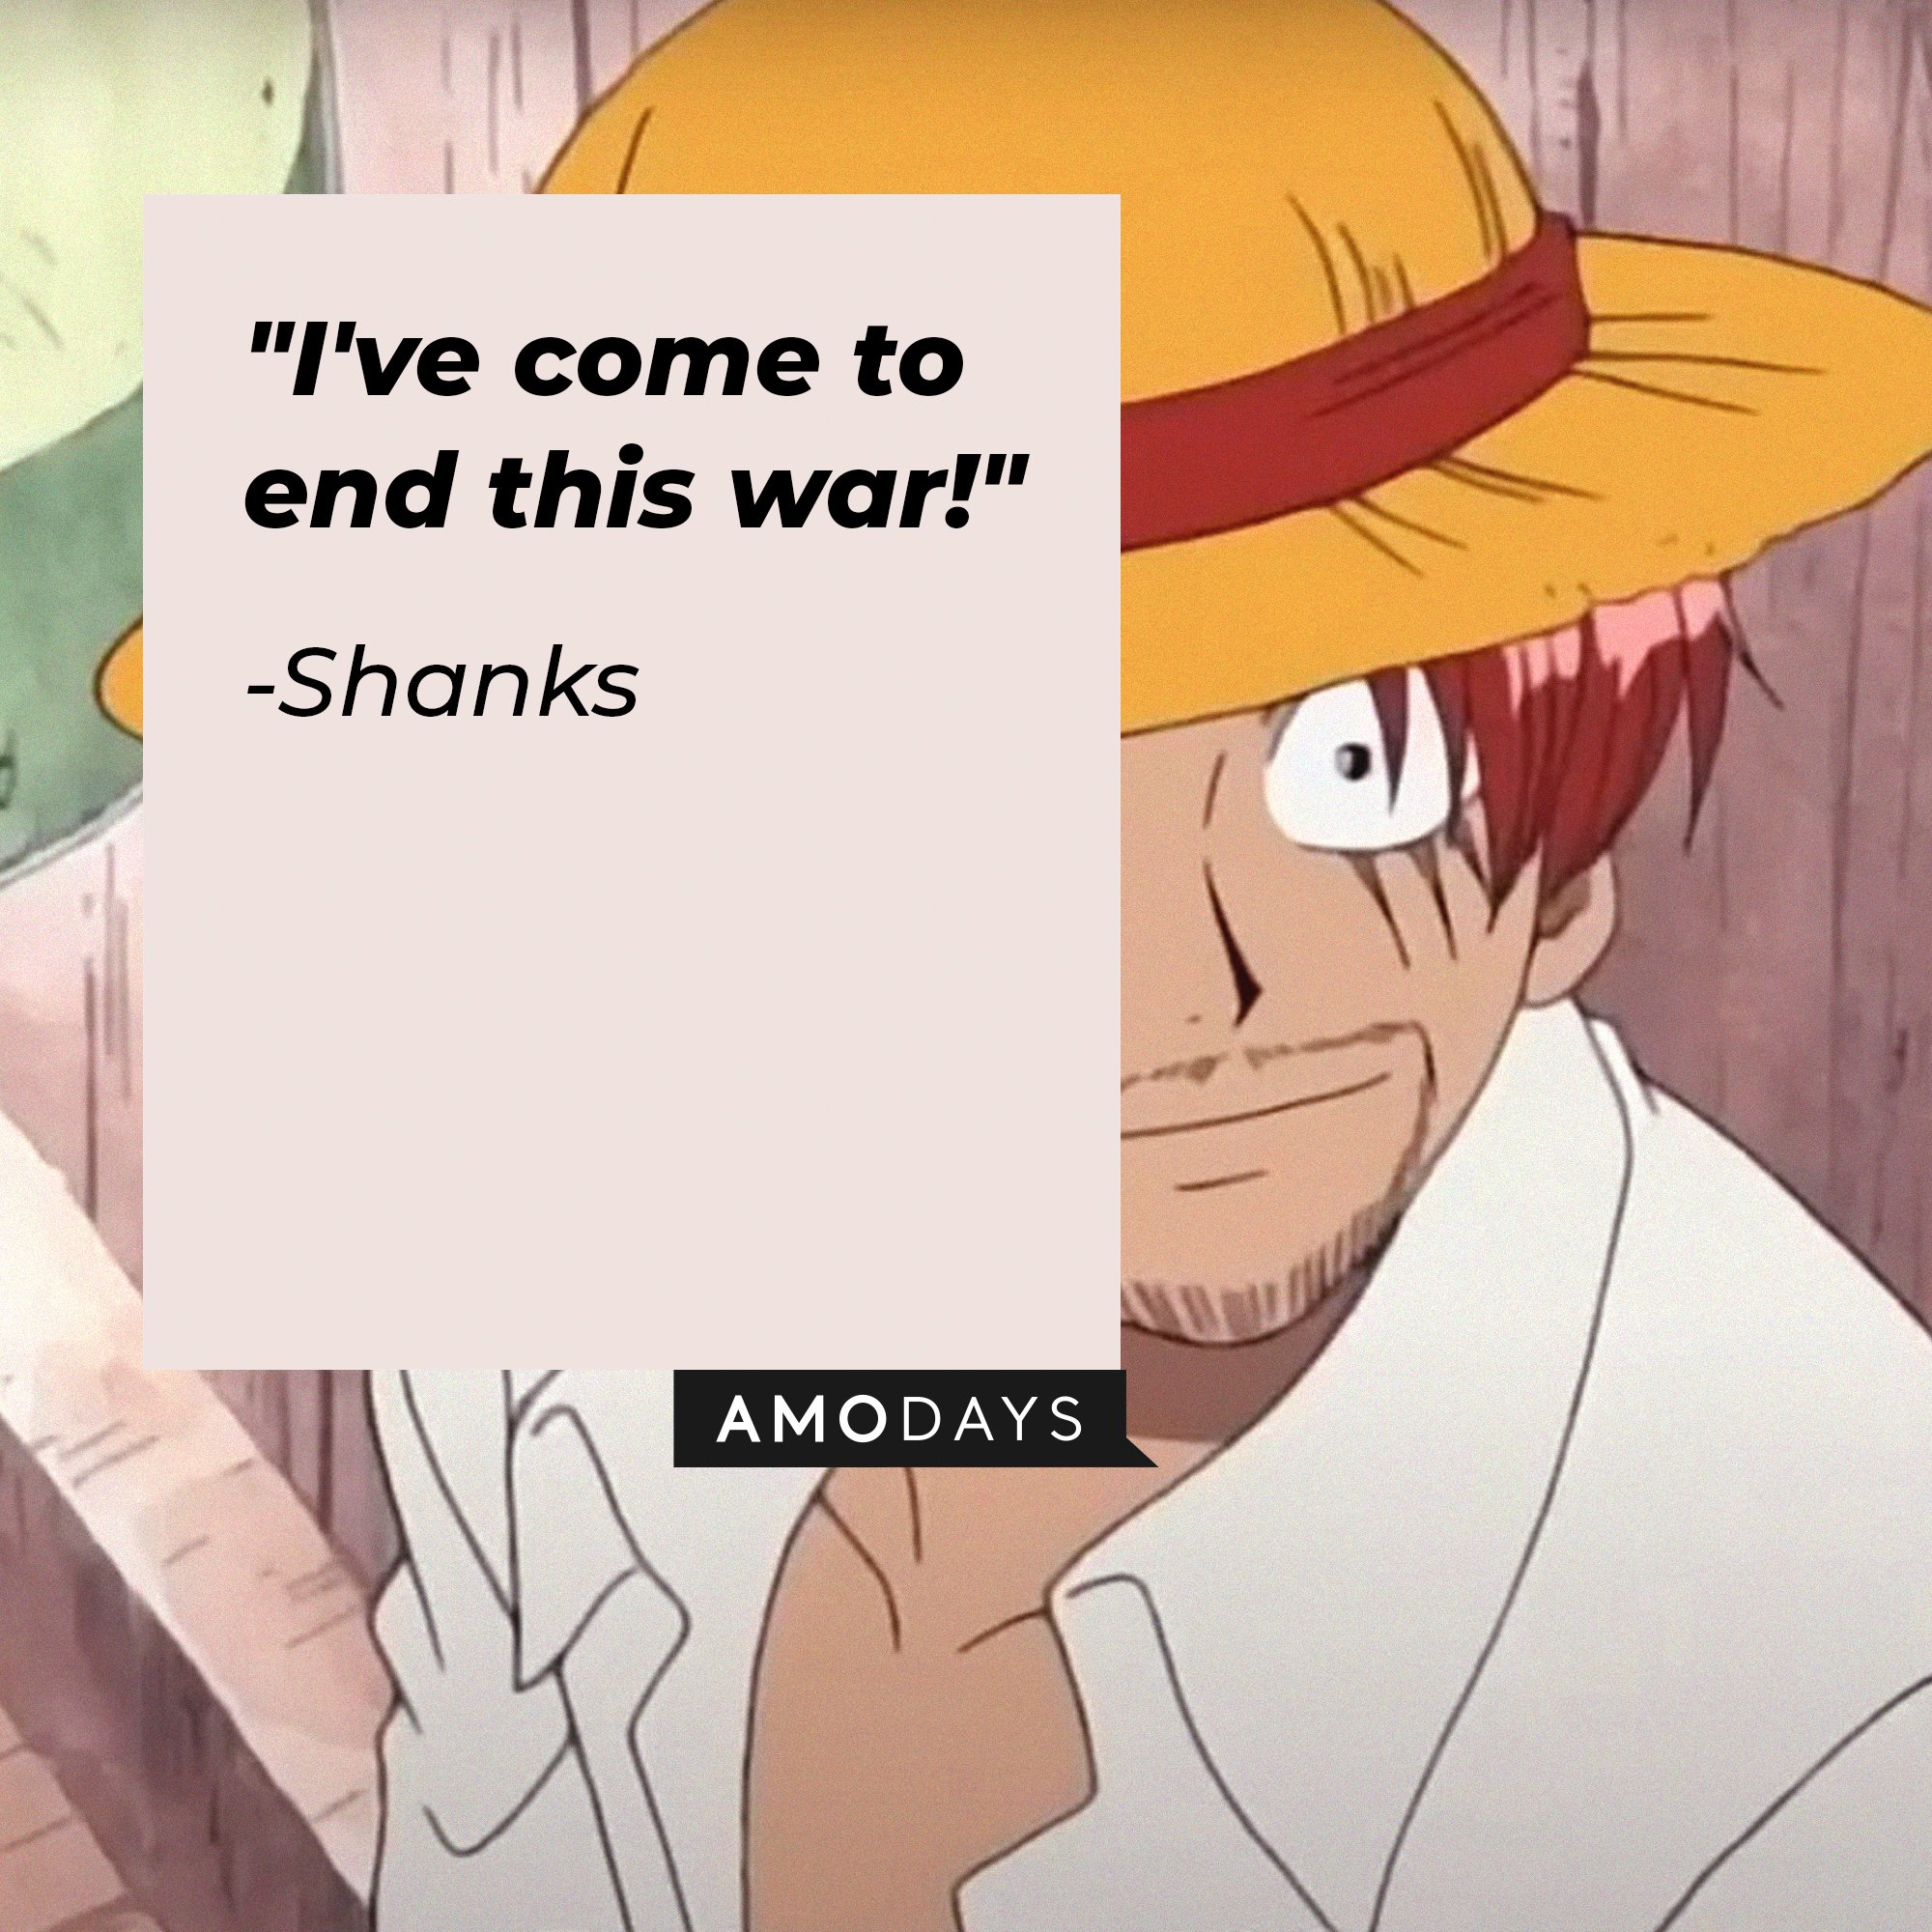 Shanks’ quote: "I've come to end this war!" | Image: AmoDays